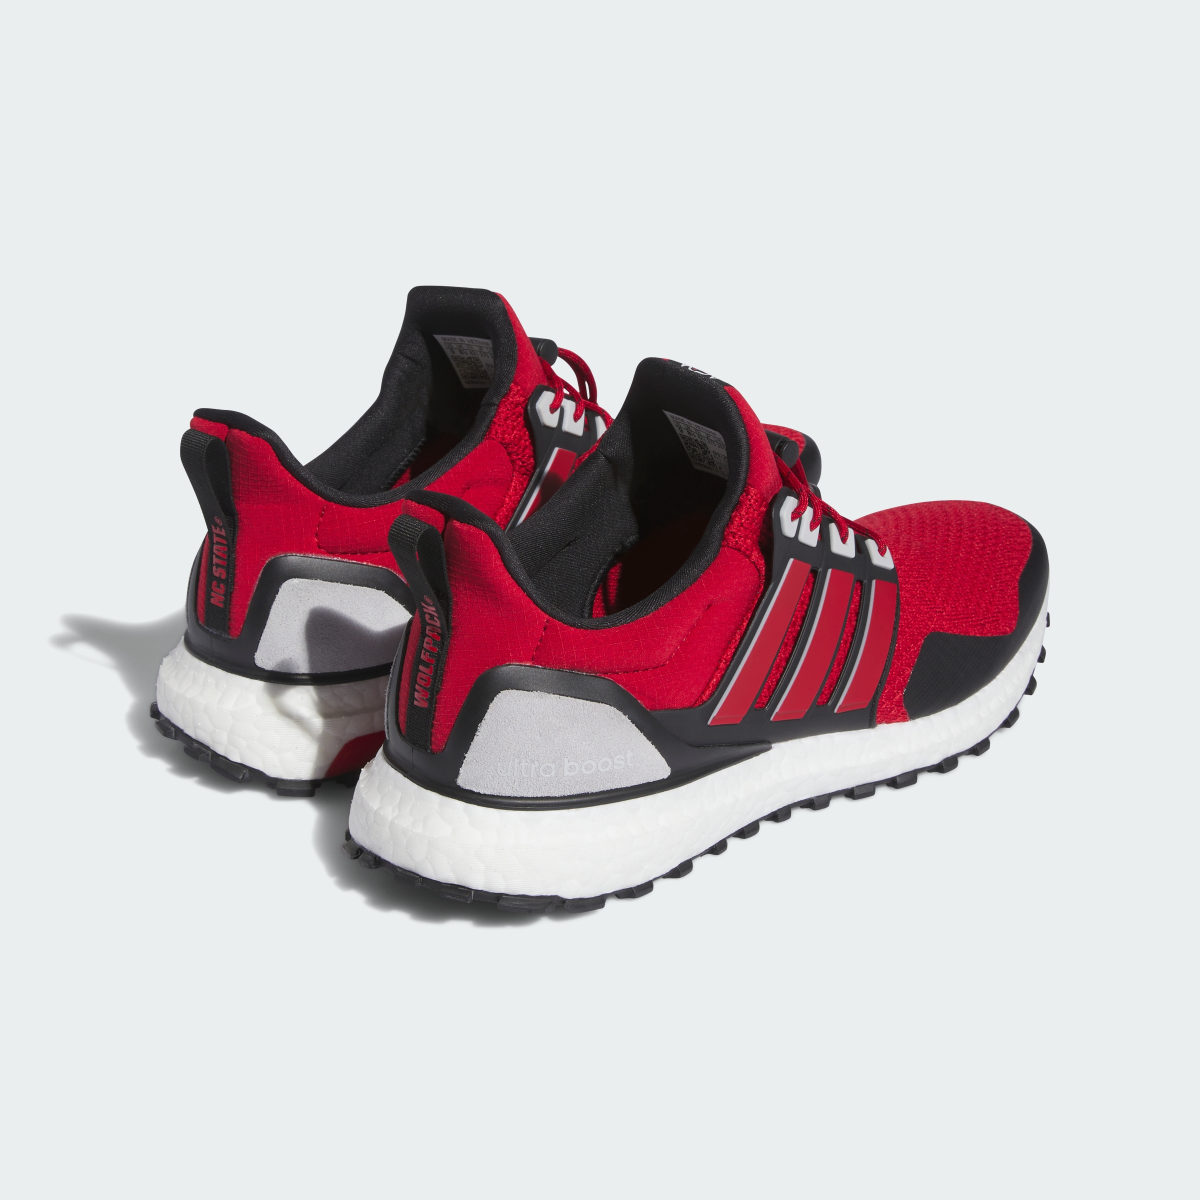 Adidas NC State Ultraboost 1.0 Shoes. 6